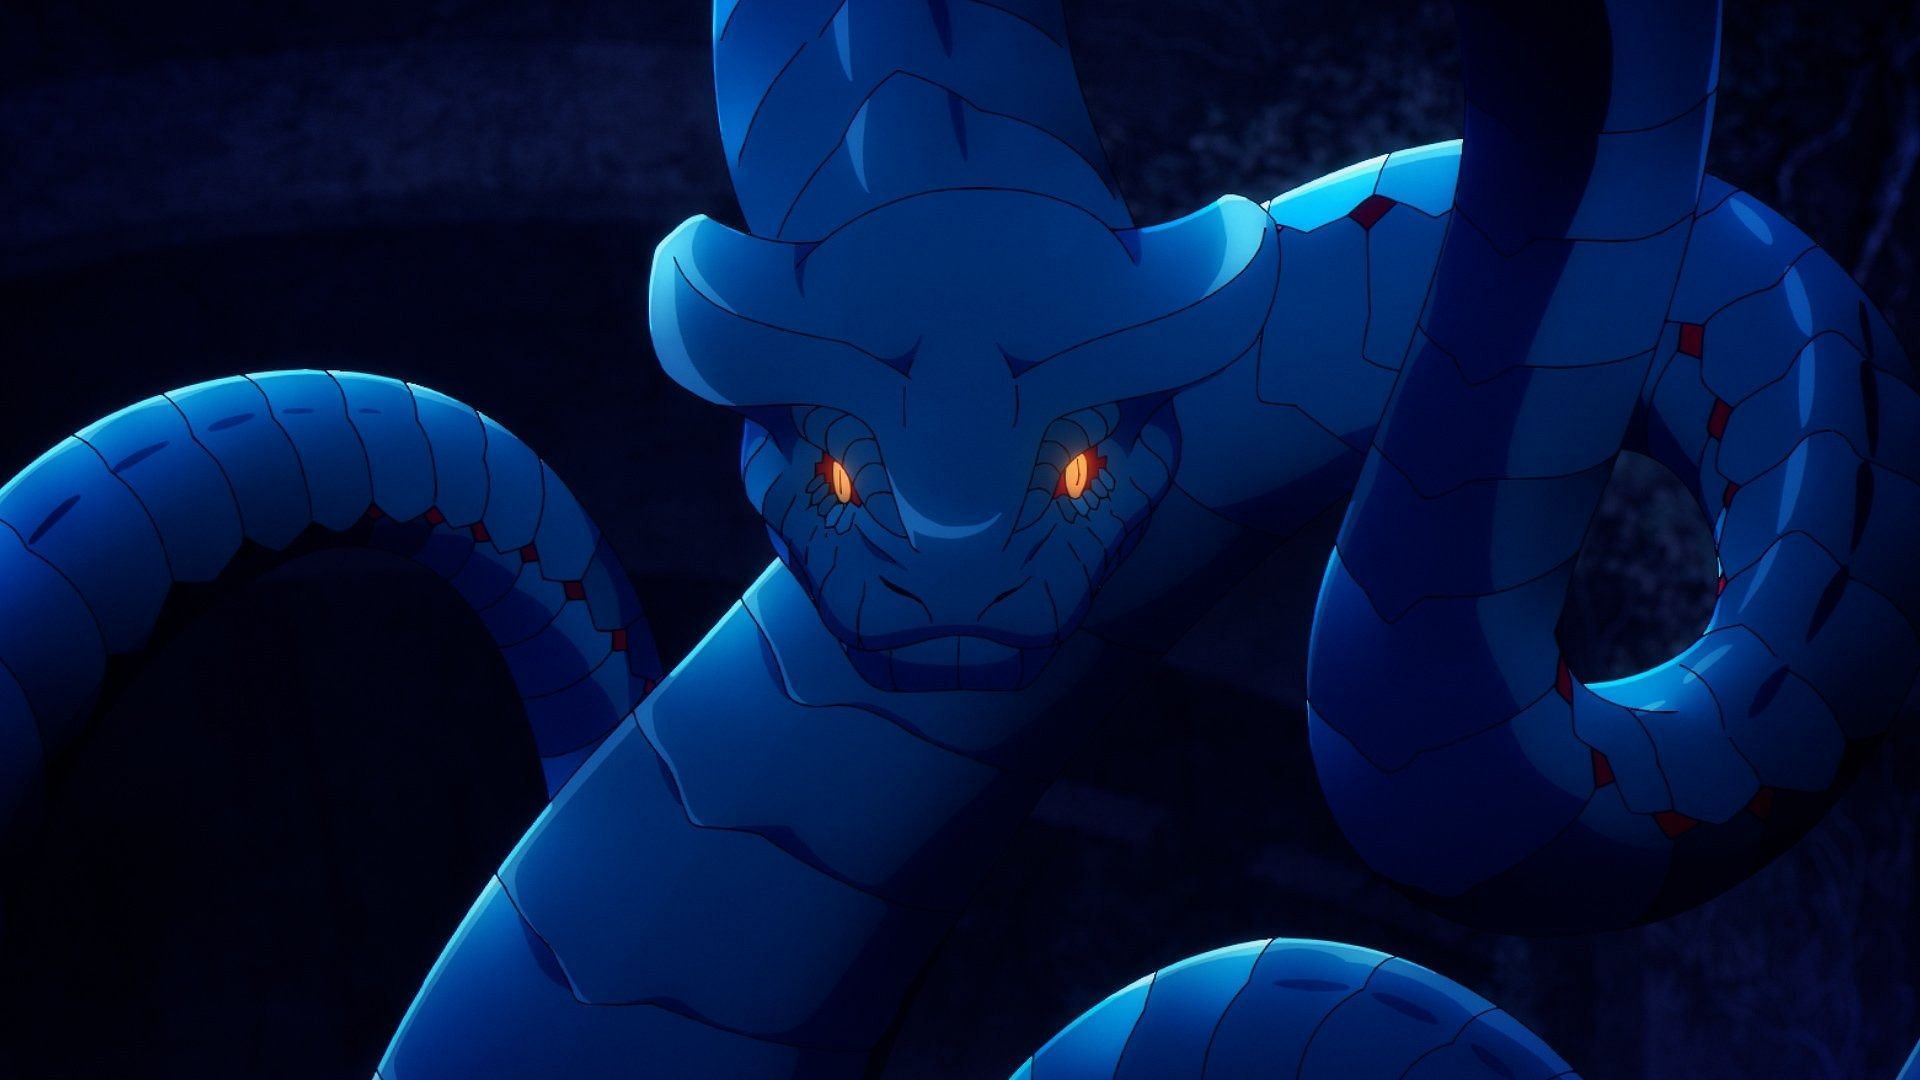 The Instant Dungeon boss as seen in the anime (Image via A-1 Pictures)